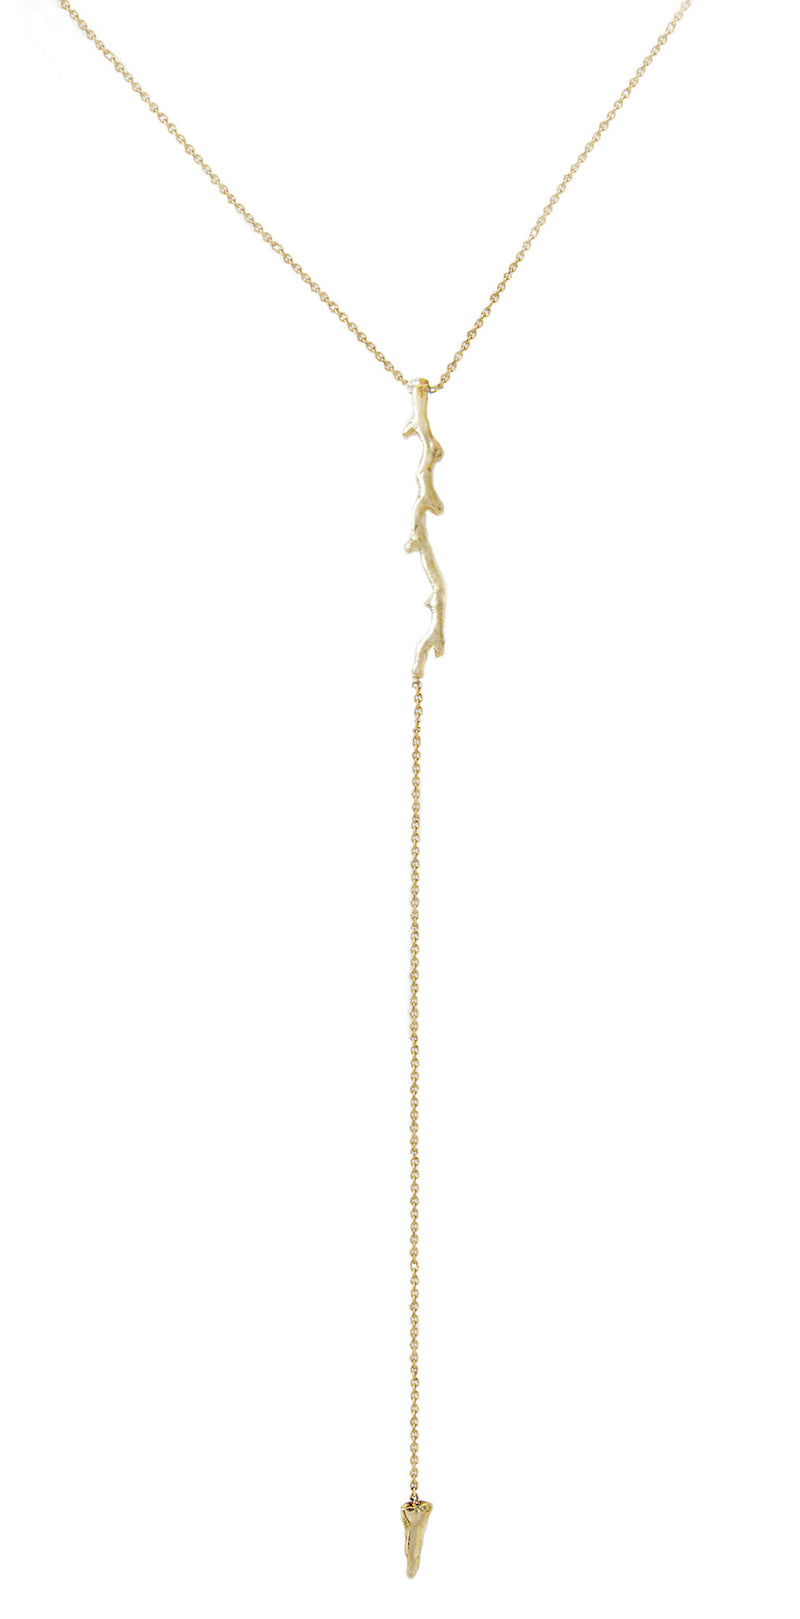 Misa Jewelry Handcrafted Necklace - Twig Lariat Necklace